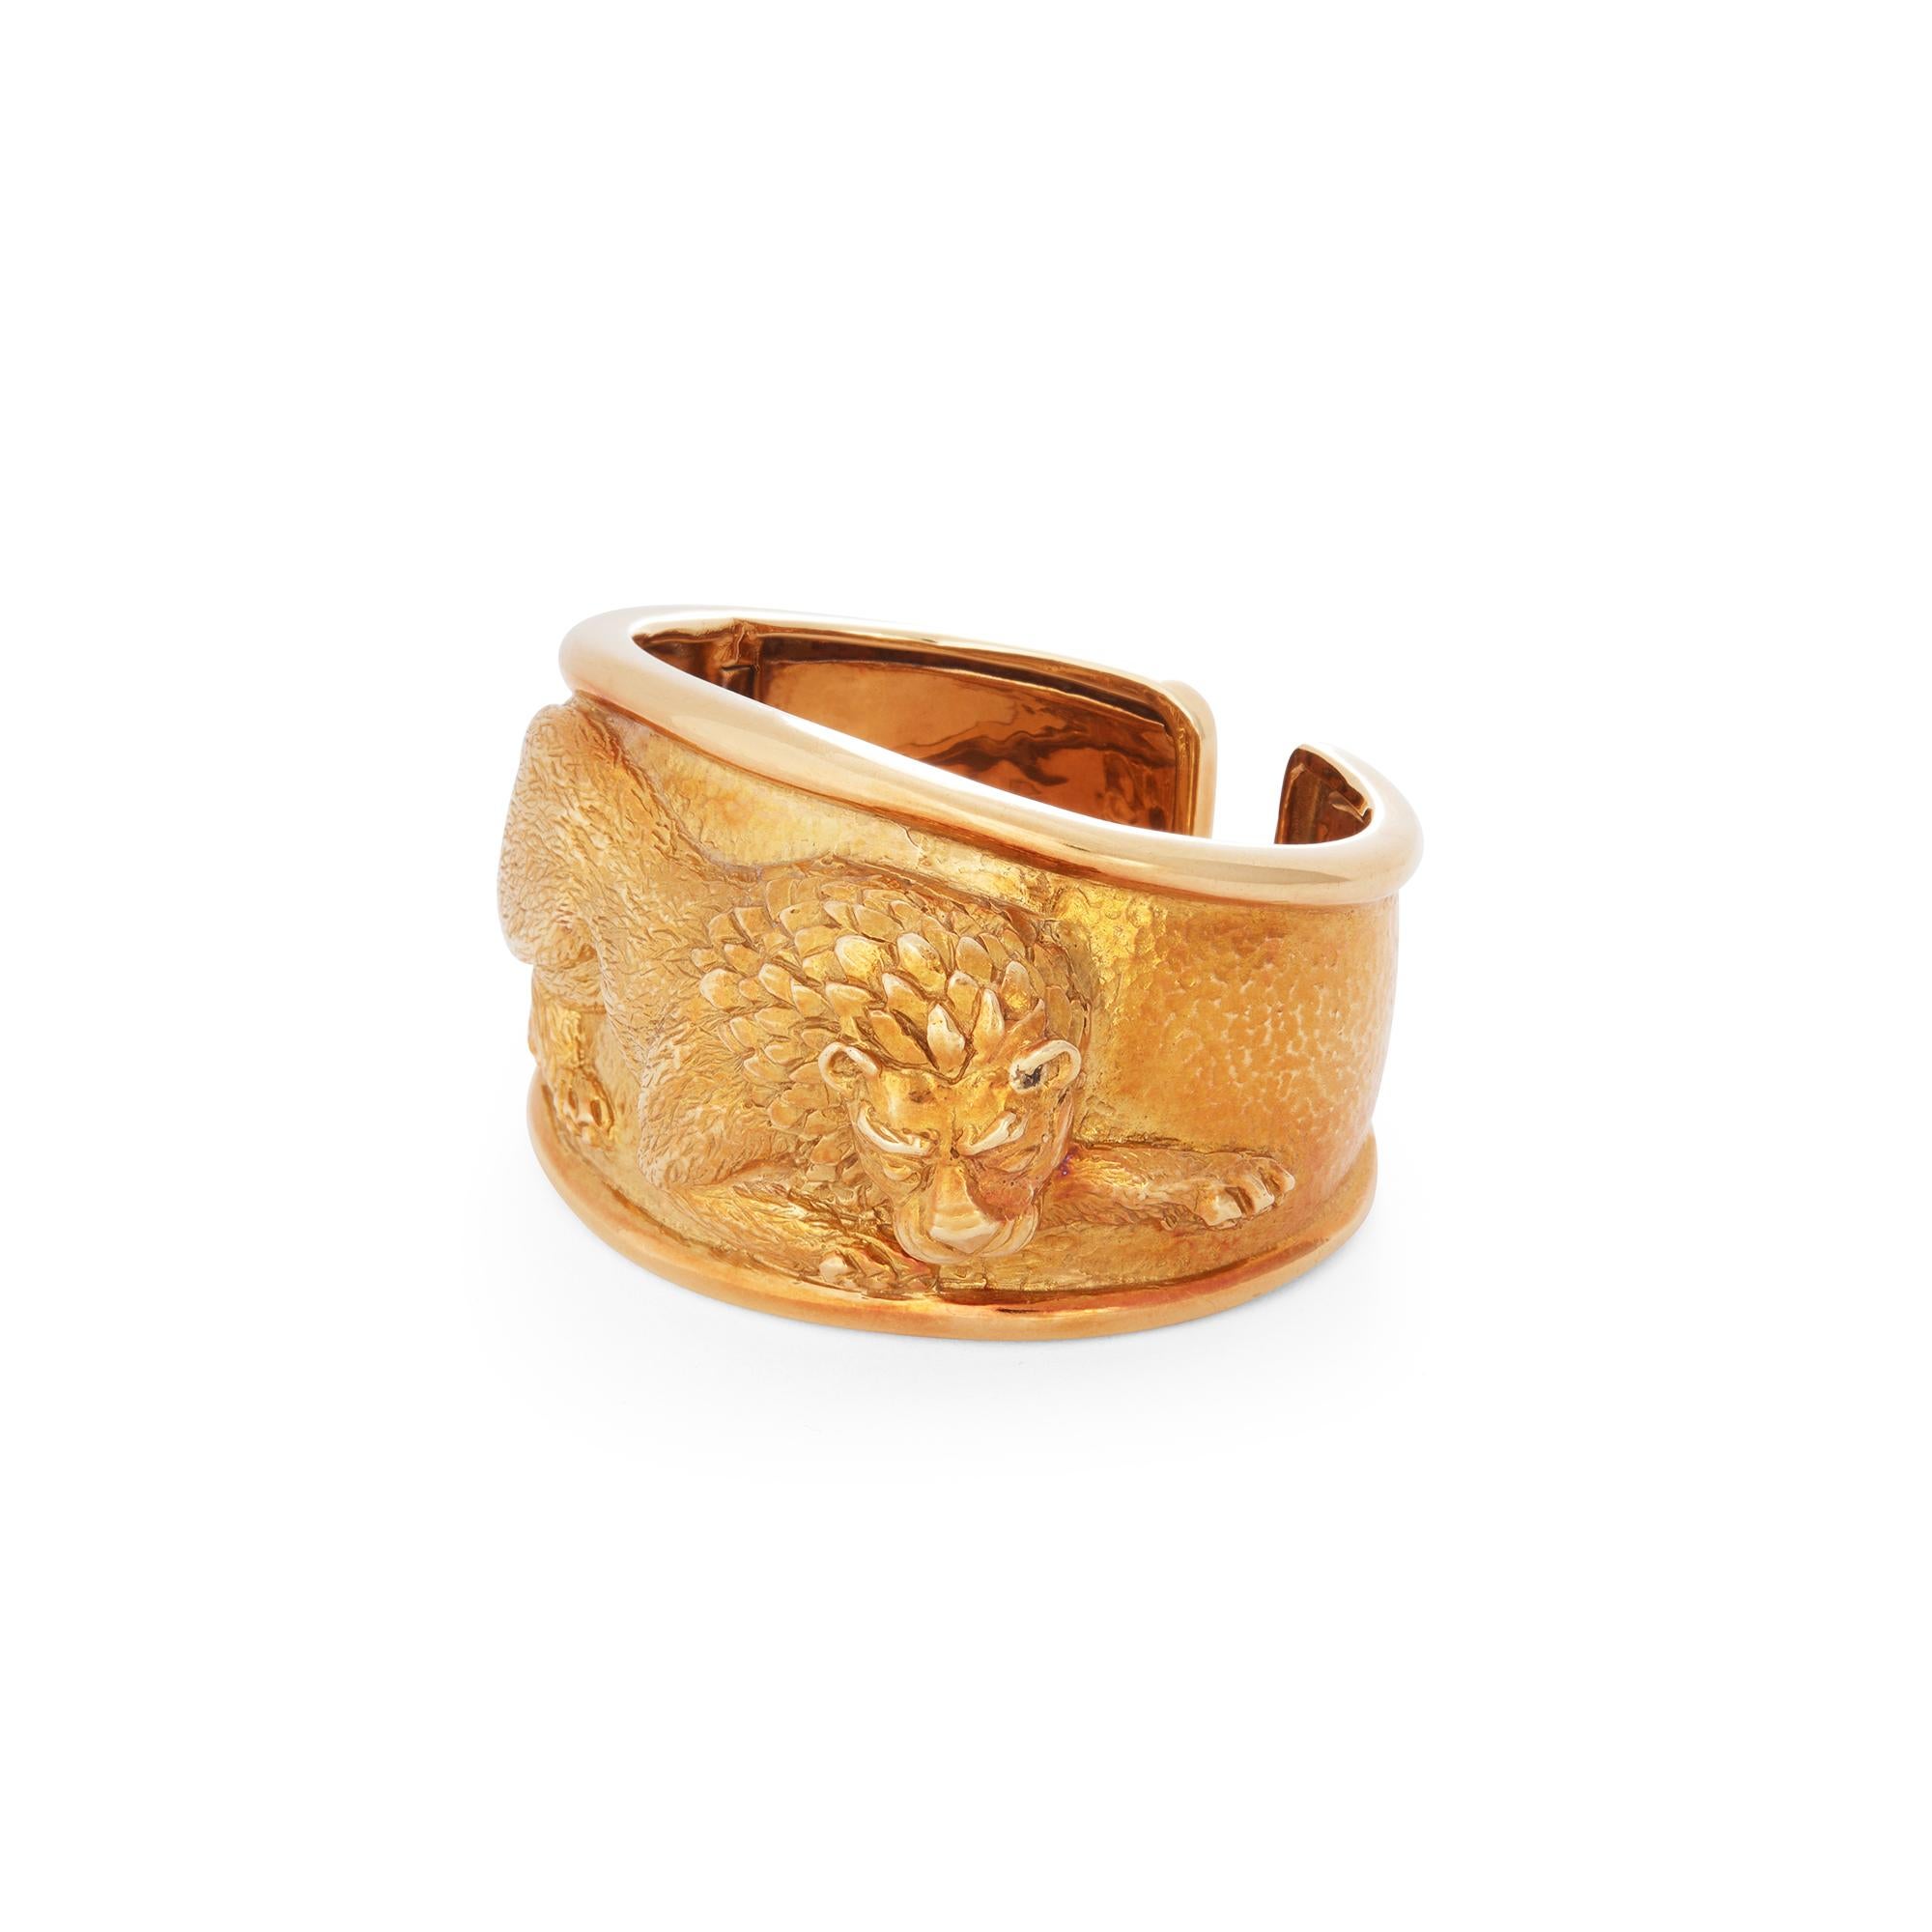 Authentic David Webb Repoussé Lion cuff bracelet crafted in 18 karat yellow gold.  Designed as a sculptural lion in hunting posture, ready to pounce.  The lion's coat and mane are delicately engraved to resemble a lion's fur and the hammered texture